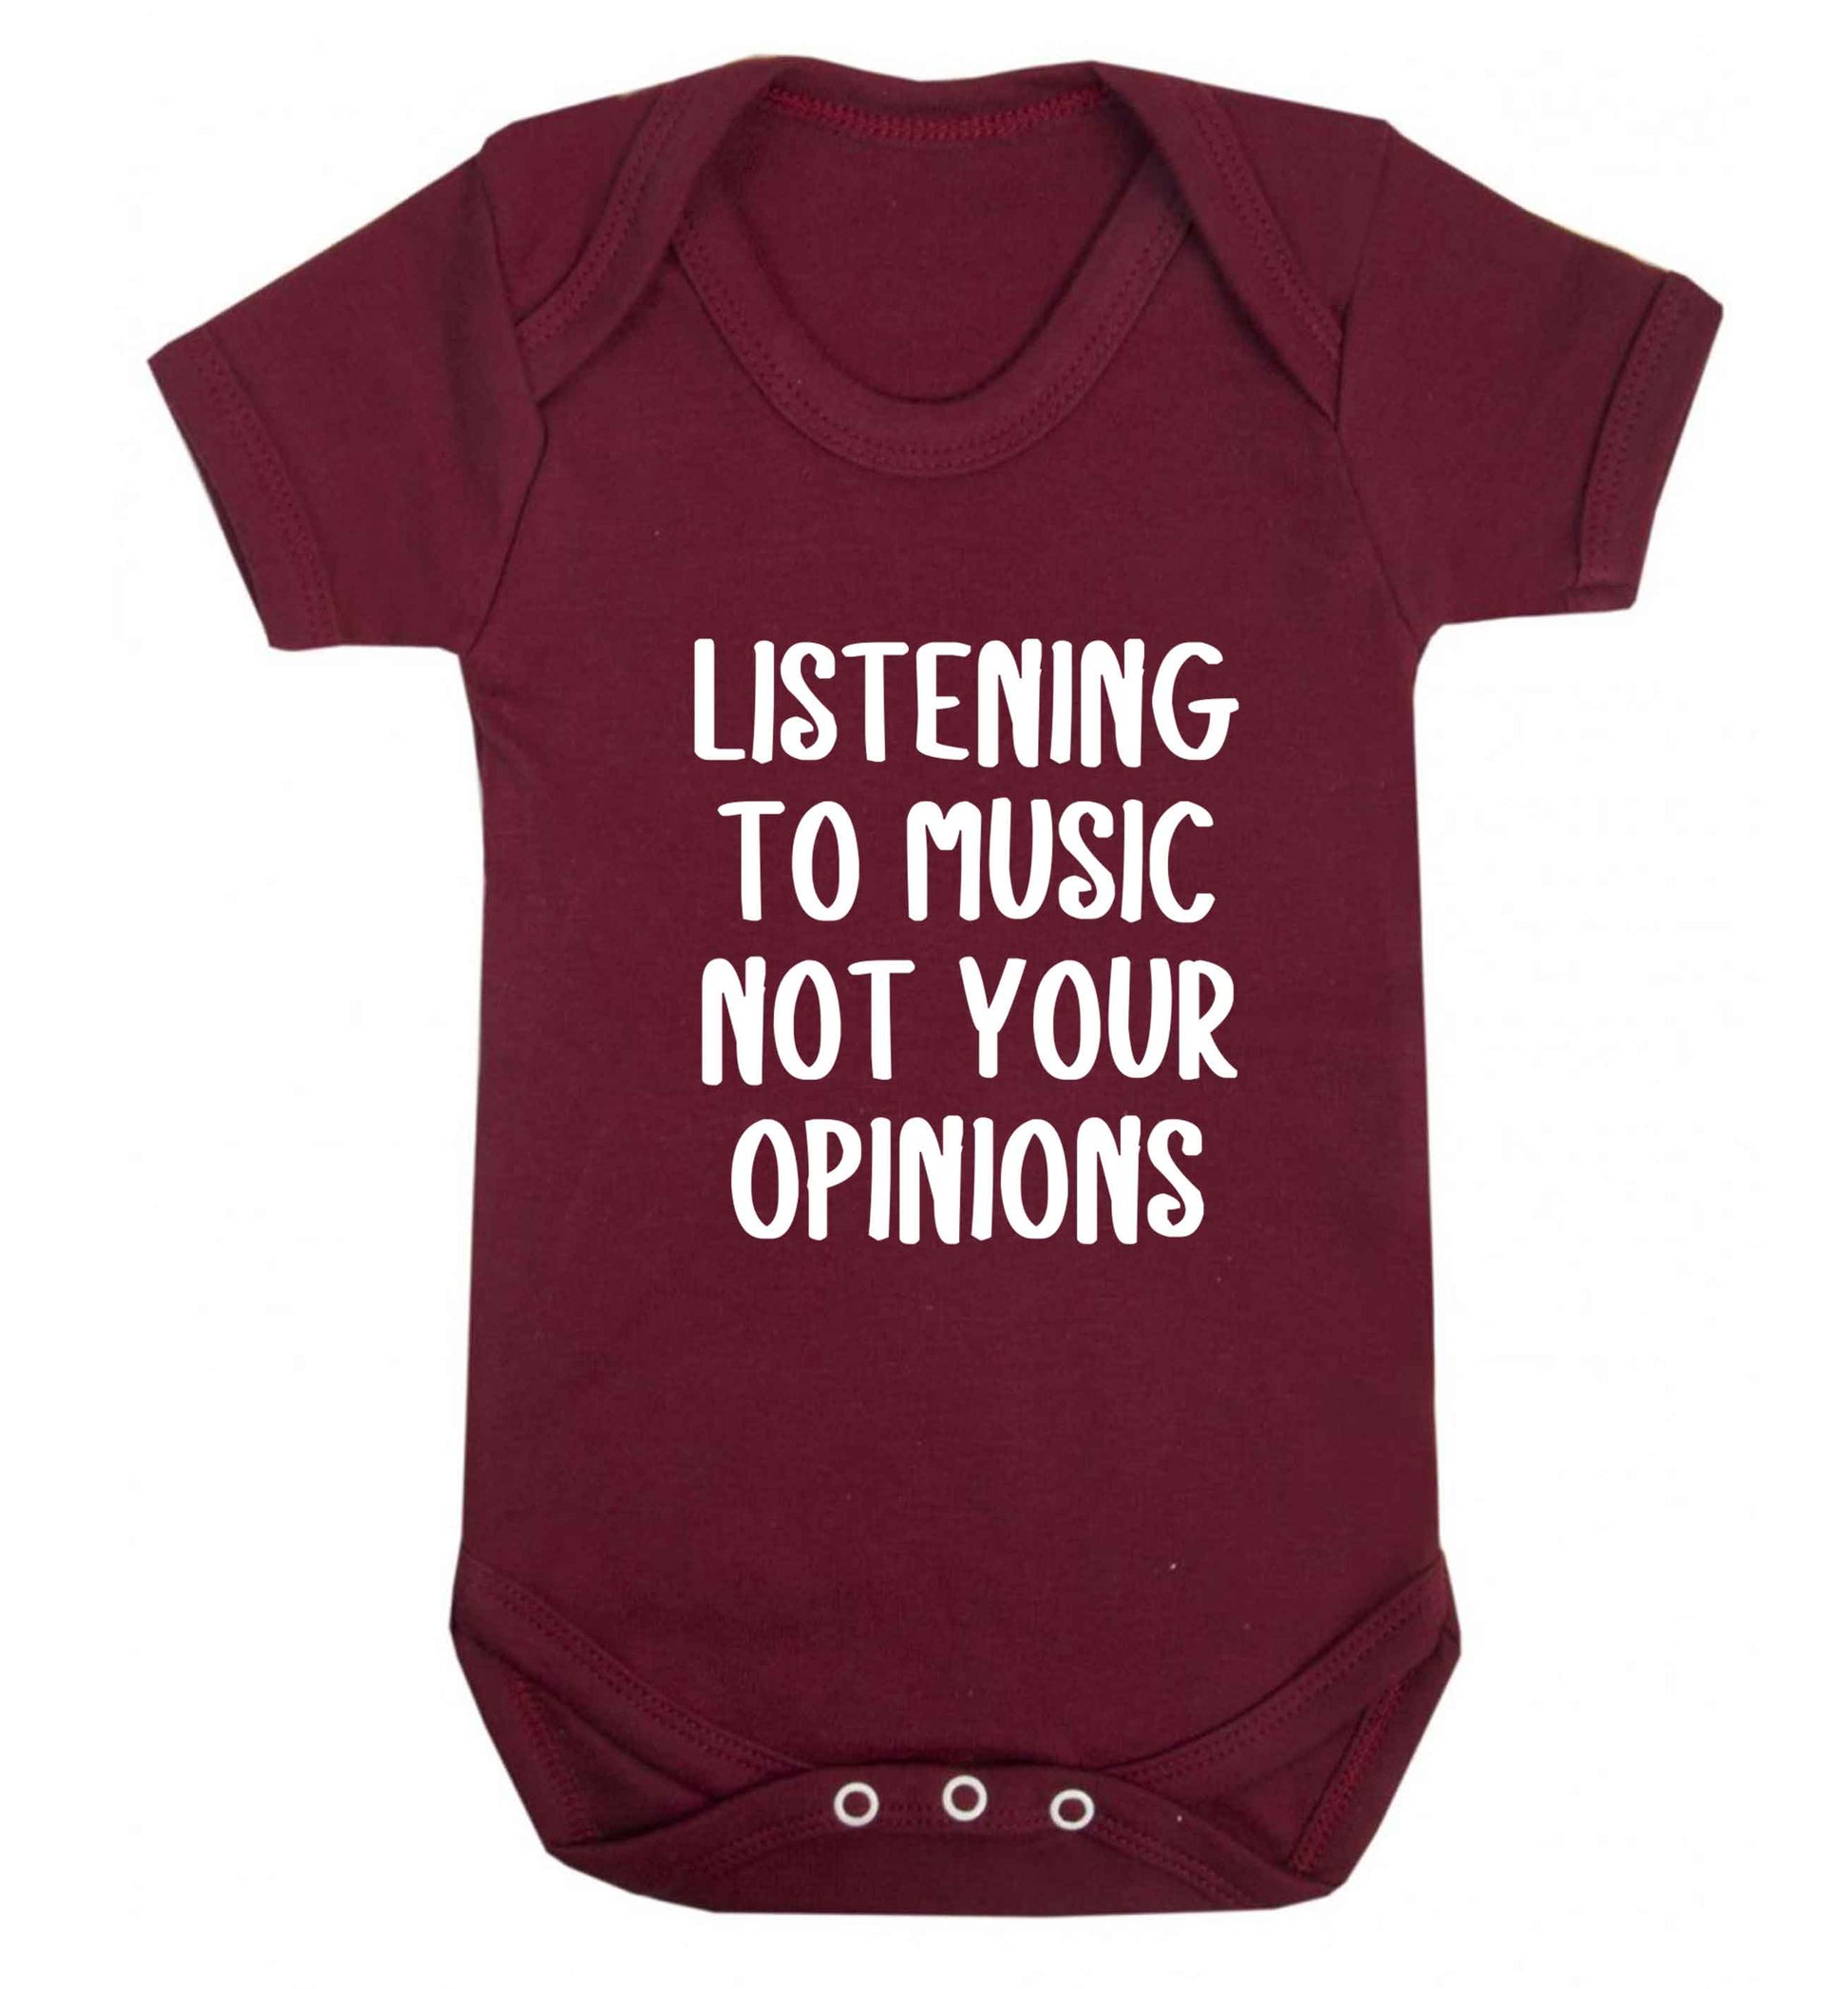 Listening to music not your opinions baby vest maroon 18-24 months